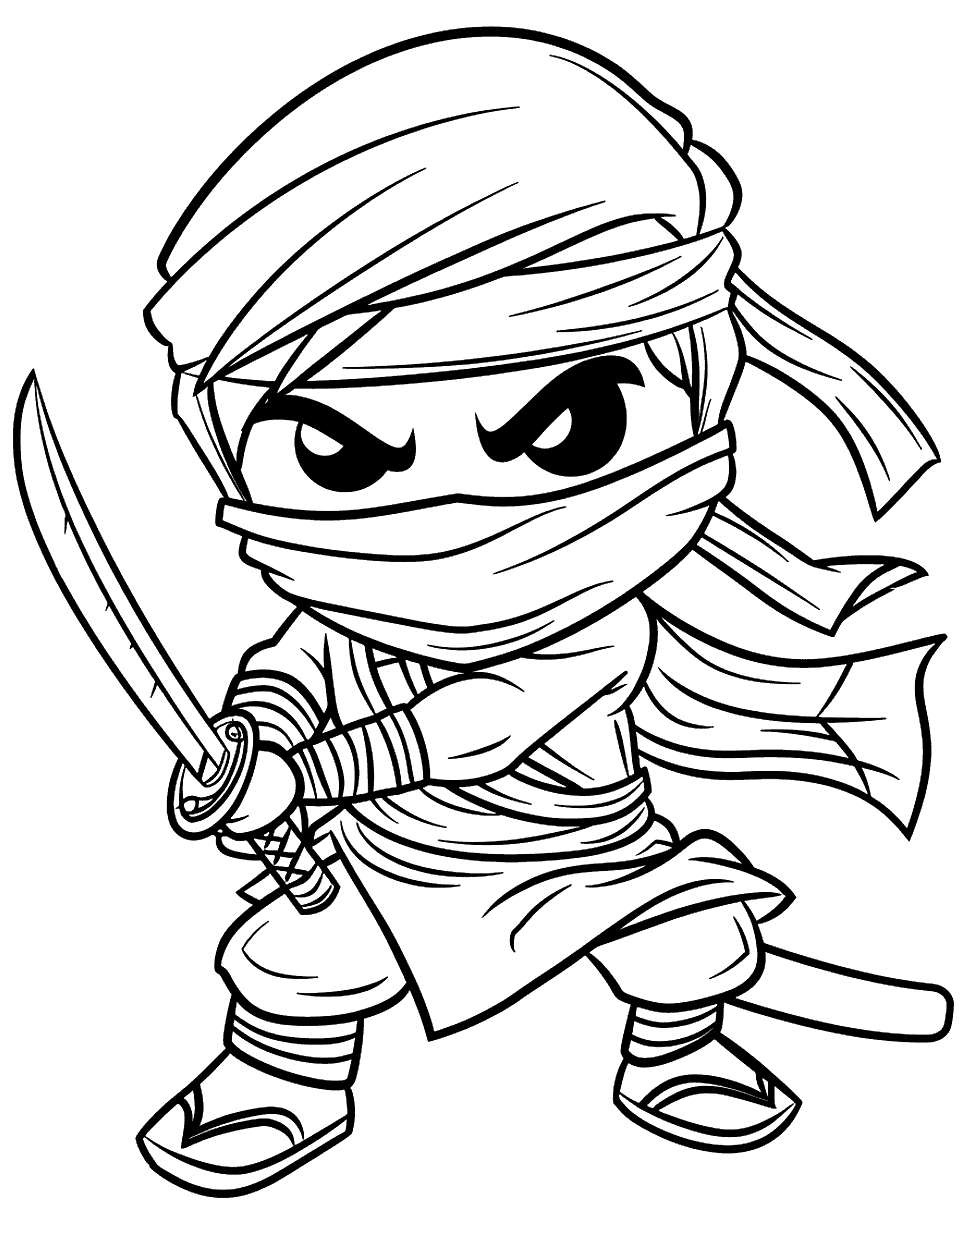 Ninjago Hero Ninja Coloring Page - A character from Ninjago, posed heroically with a weapon in hand.